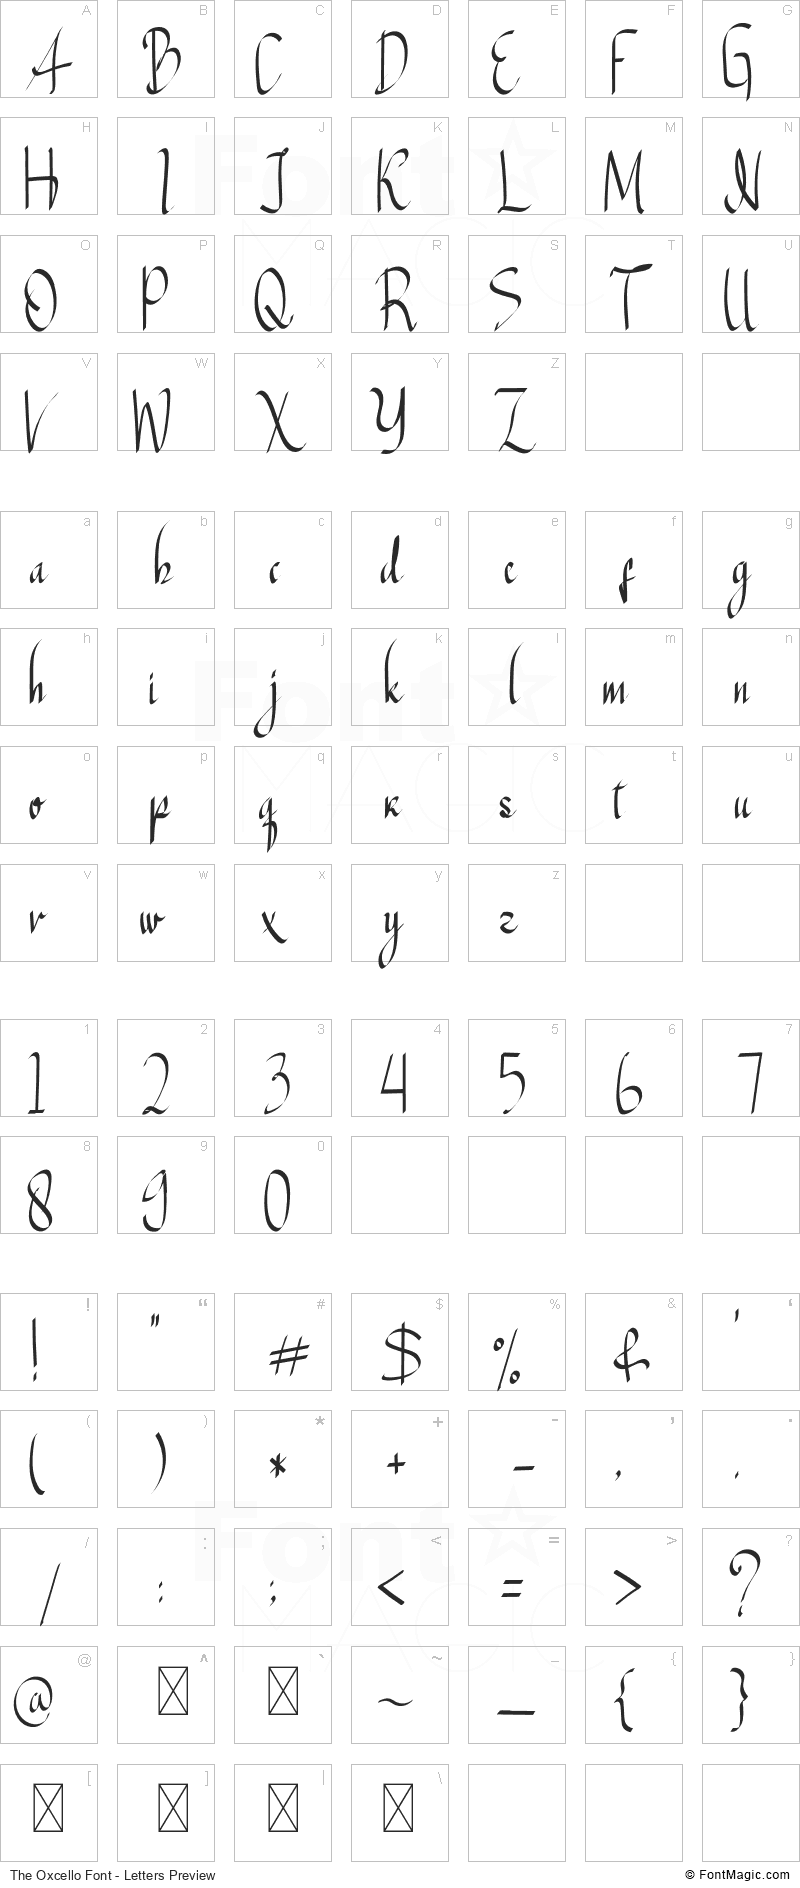 The Oxcello Font - All Latters Preview Chart